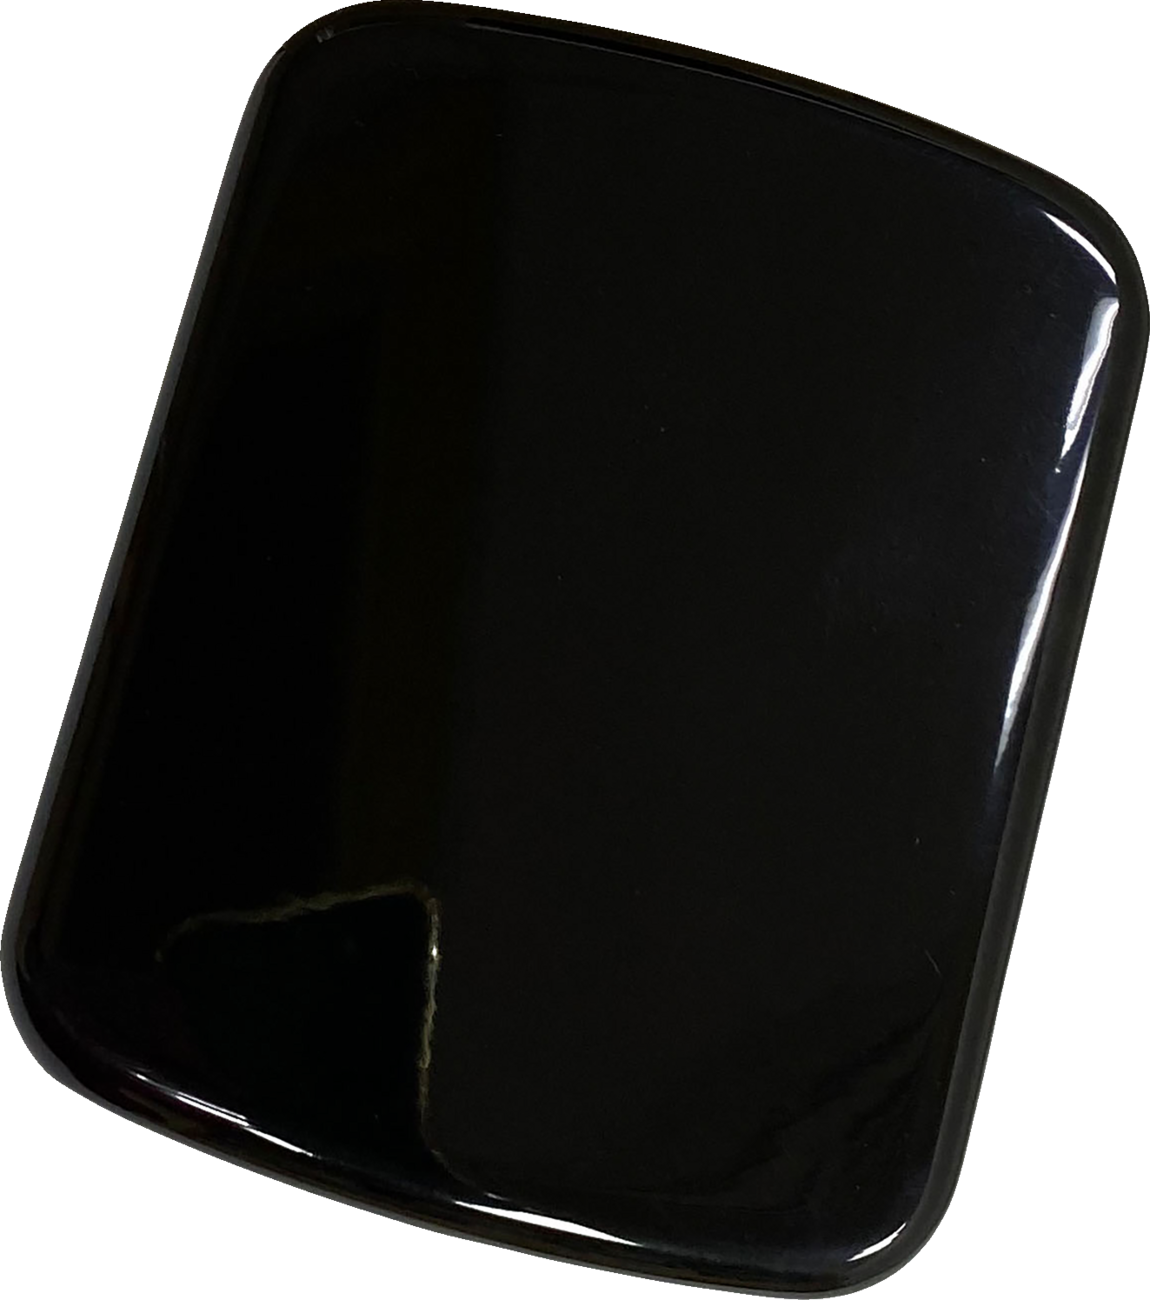 Drag Specialties Black Coil Cover fits 1999-2005 Harley DYNA FXDS FXDL FXD FXDT